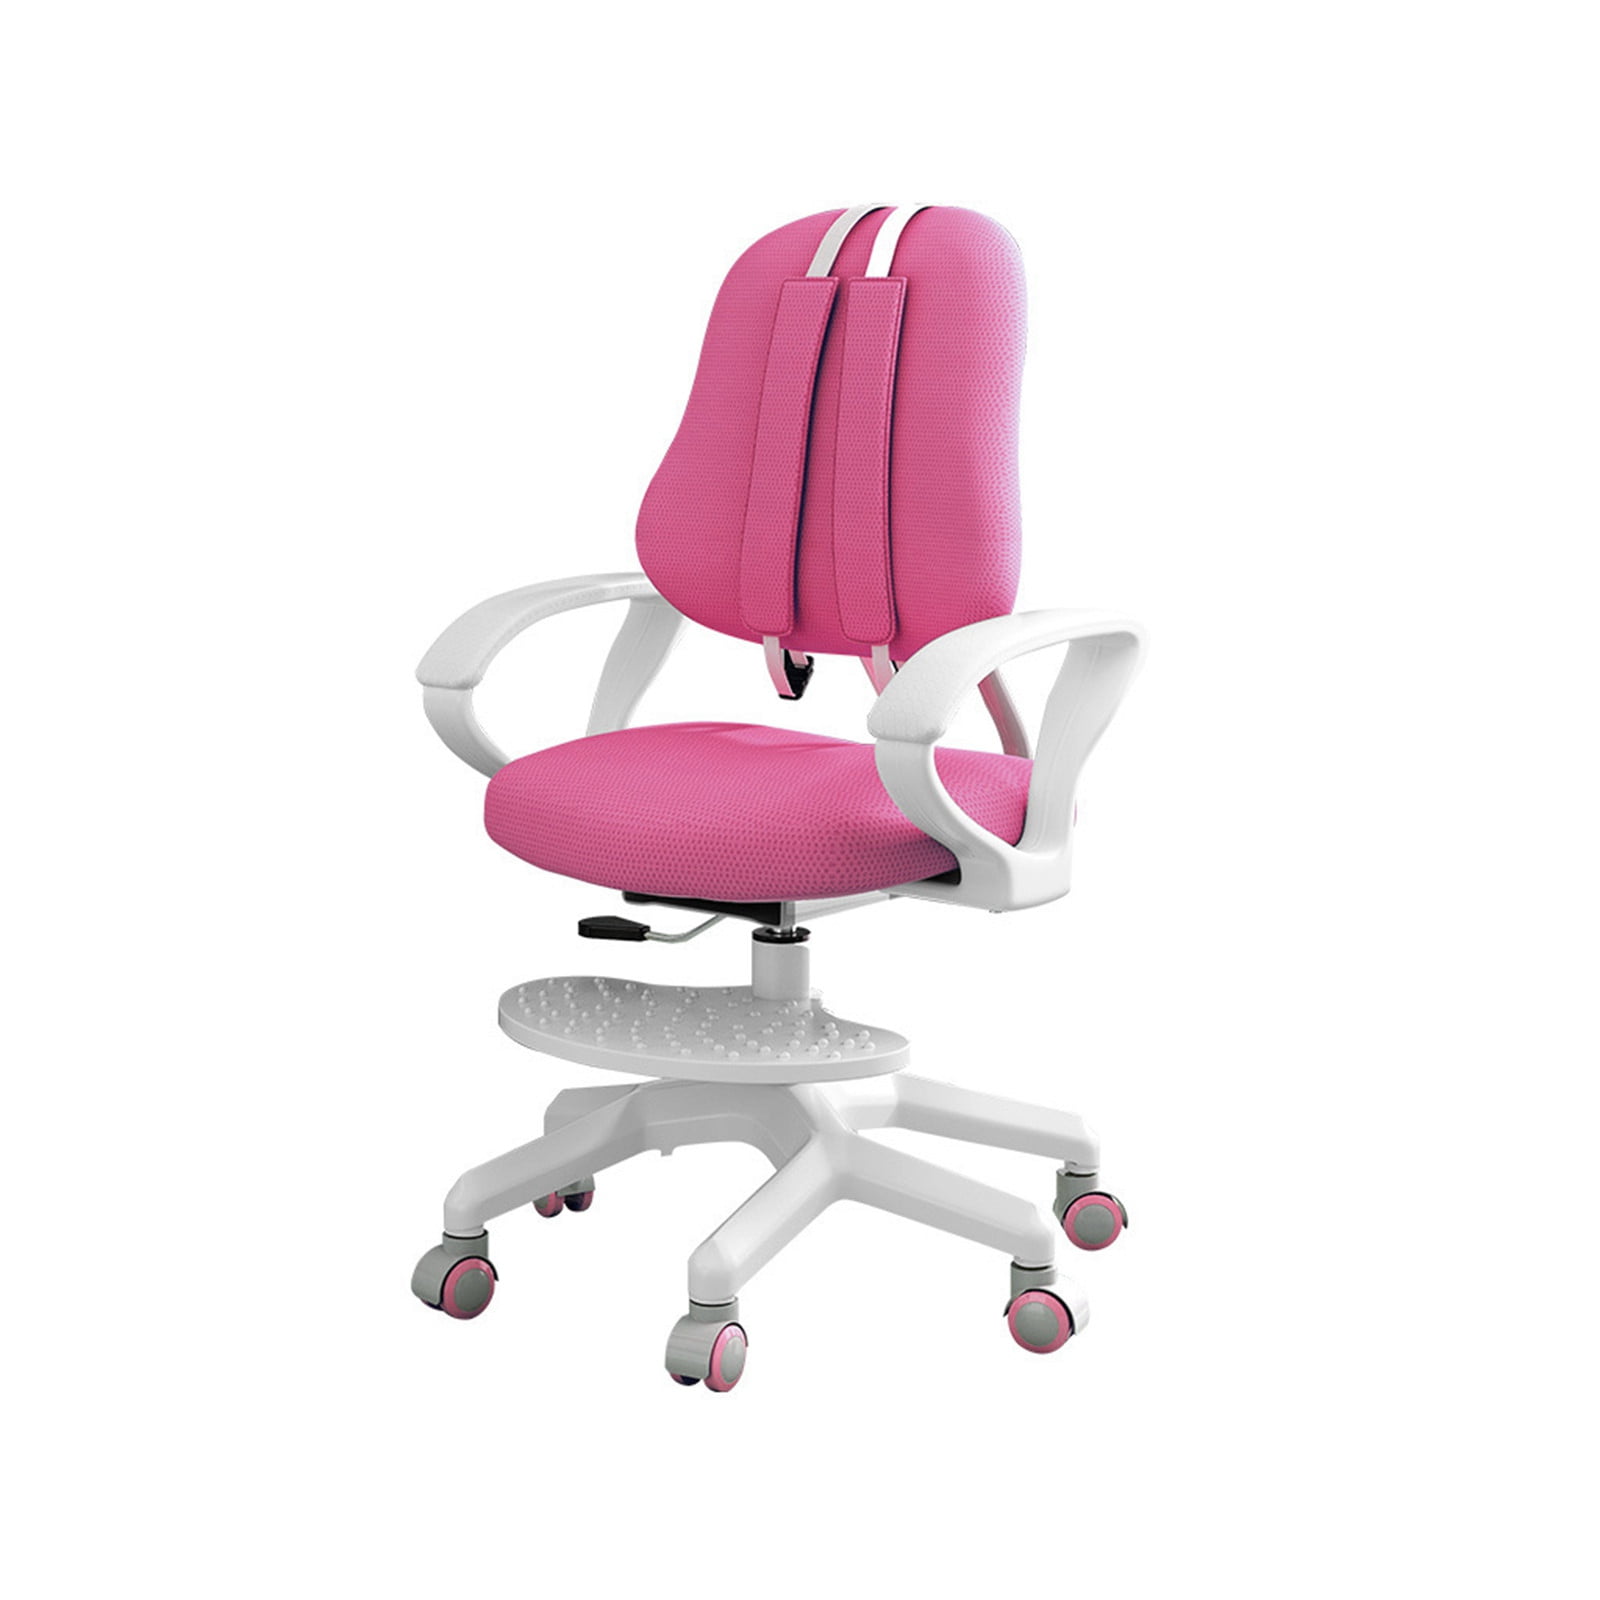 VANLOFE Desk Chair for Kids Teens Office Chair with Low